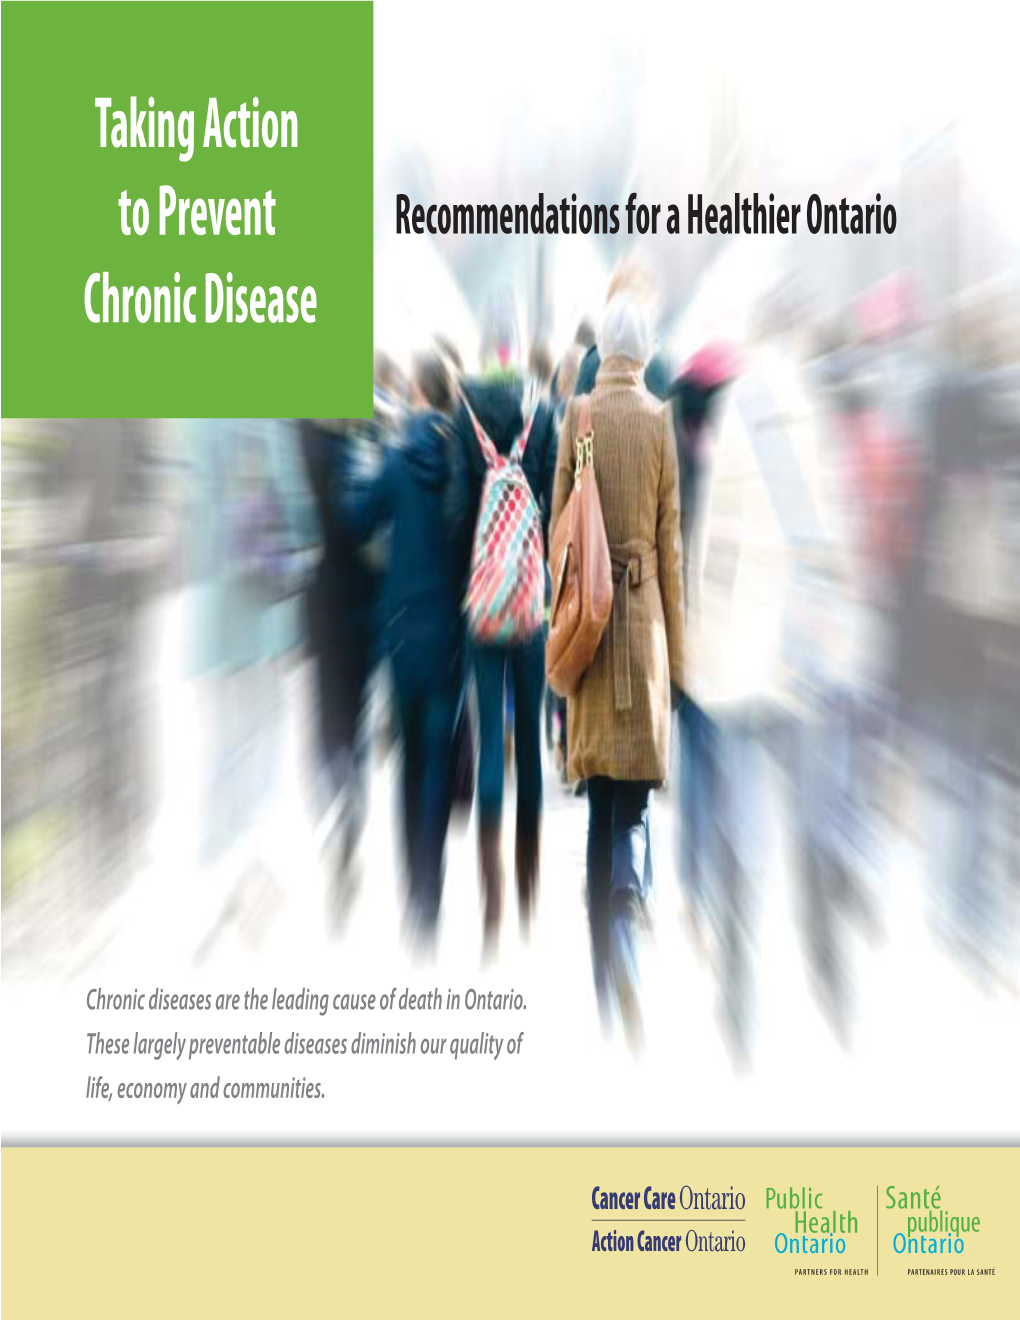 Taking Action to Prevent Chronic Disease: Recommen- Further Permission from Cancer Care Ontario Or Public Health Ontario for Non- Dations for a Healthier Ontario